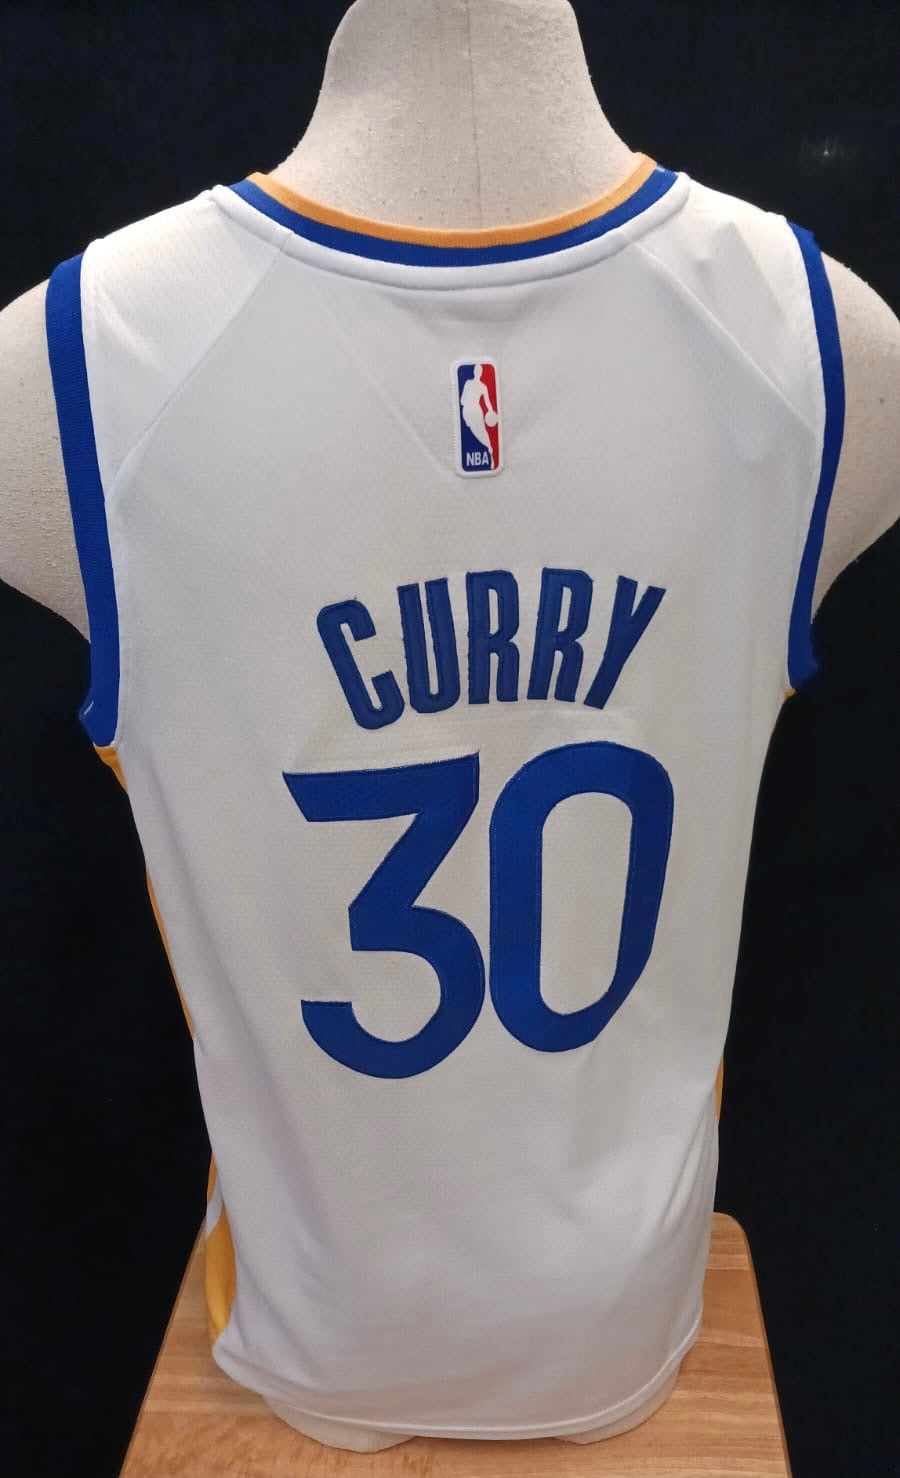 Stephen Curry Golden State Warriors Jersey Navy white Nike